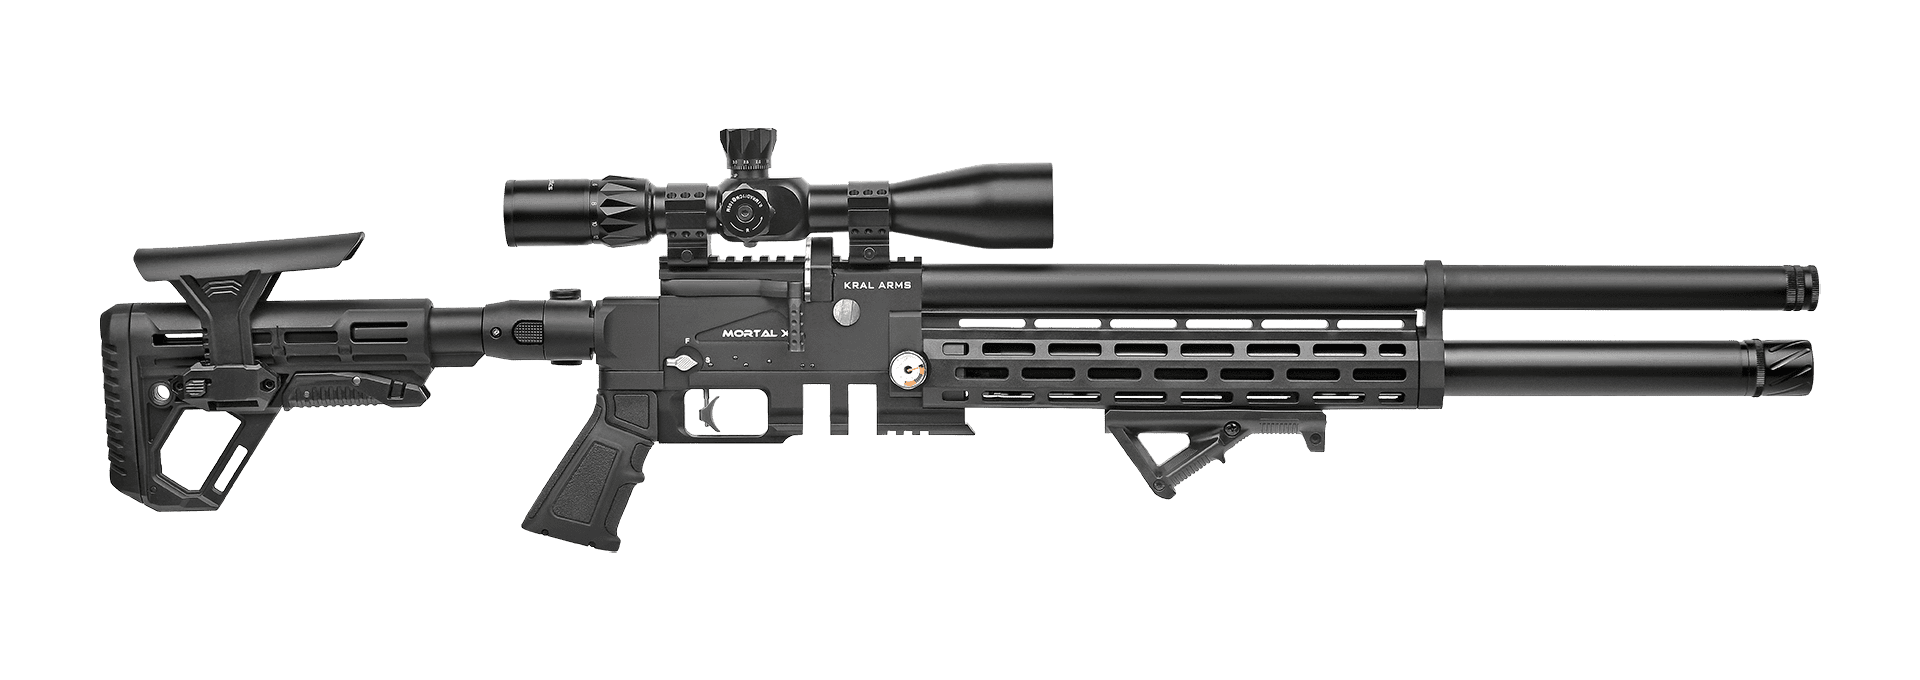 KRAL PUNCHER MORTAL X TACTICAL PCP RIFLE .22 - NeonSales South Africa